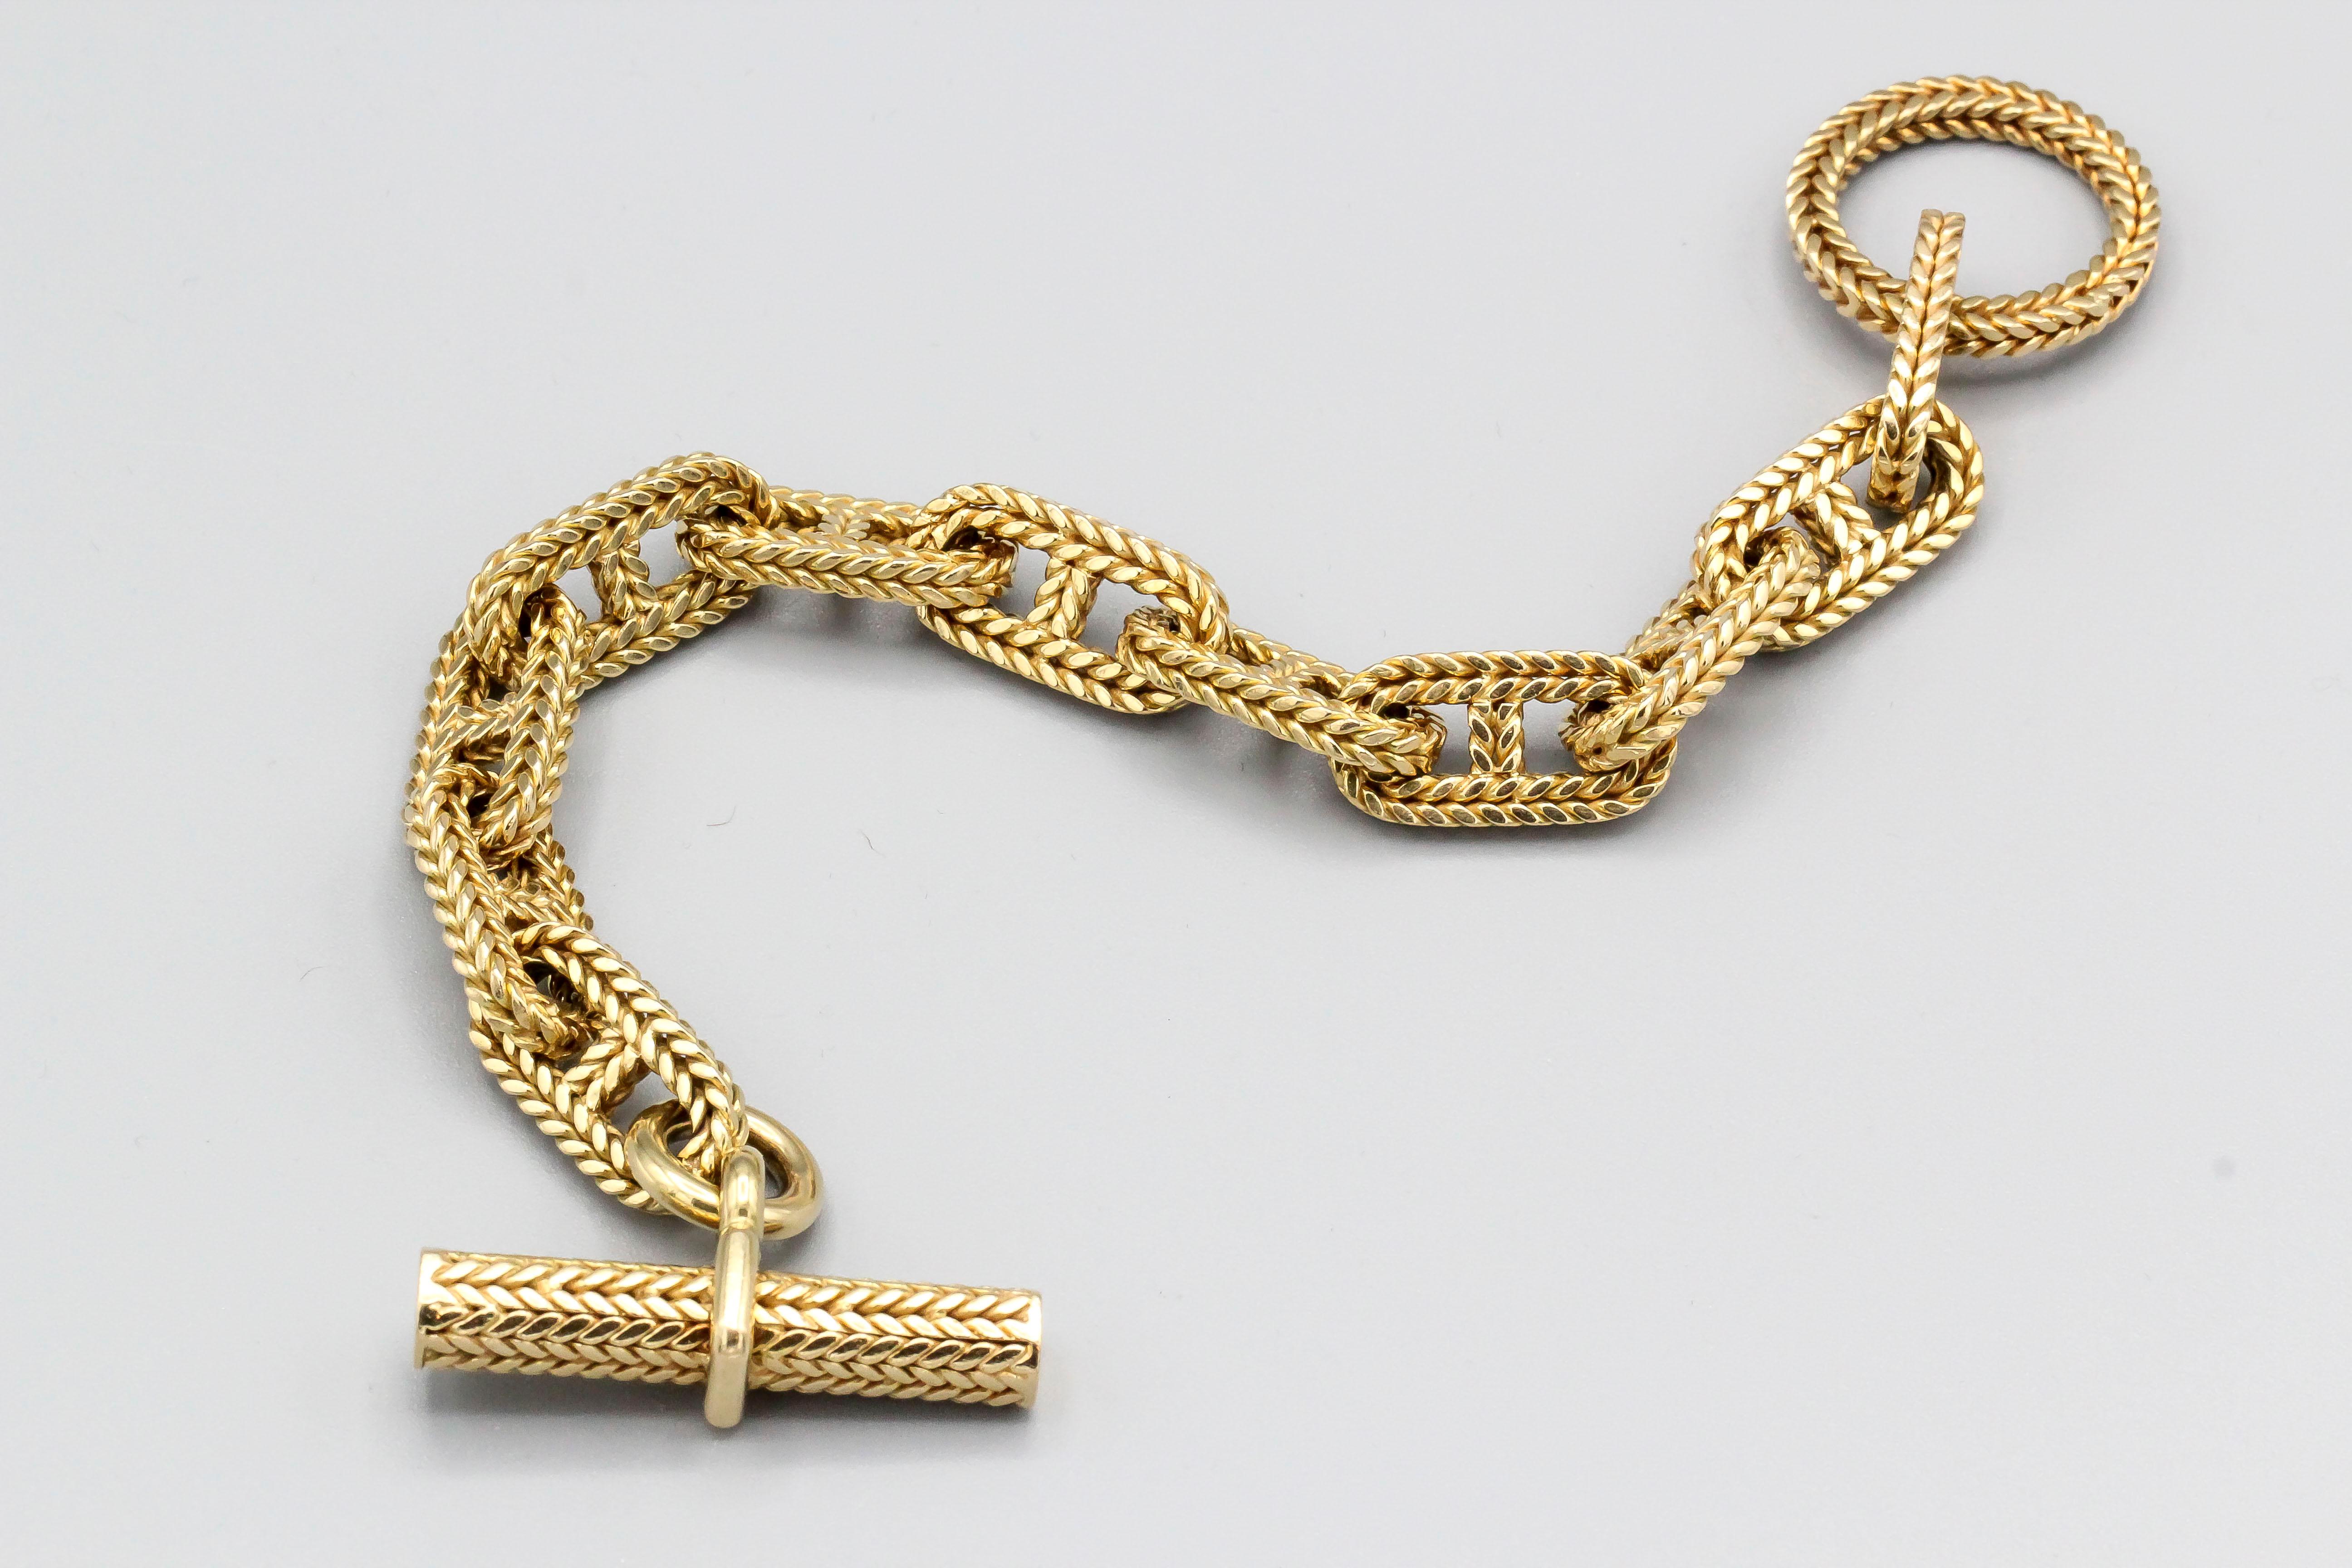 Very fine 18K yellow gold toggle link bracelet from the 